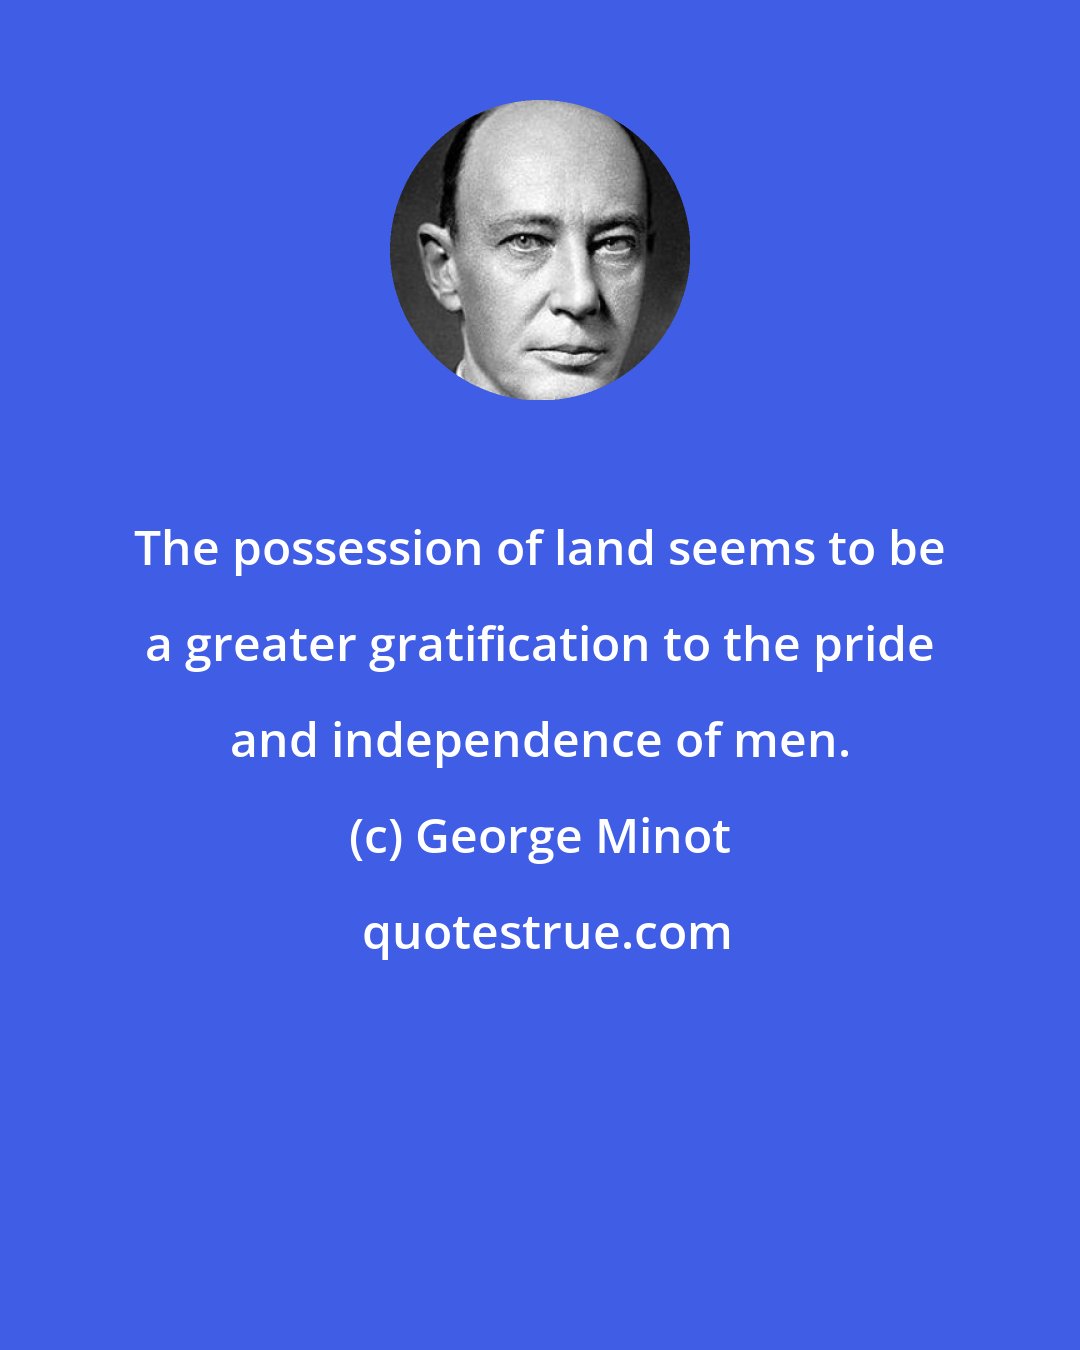 George Minot: The possession of land seems to be a greater gratification to the pride and independence of men.